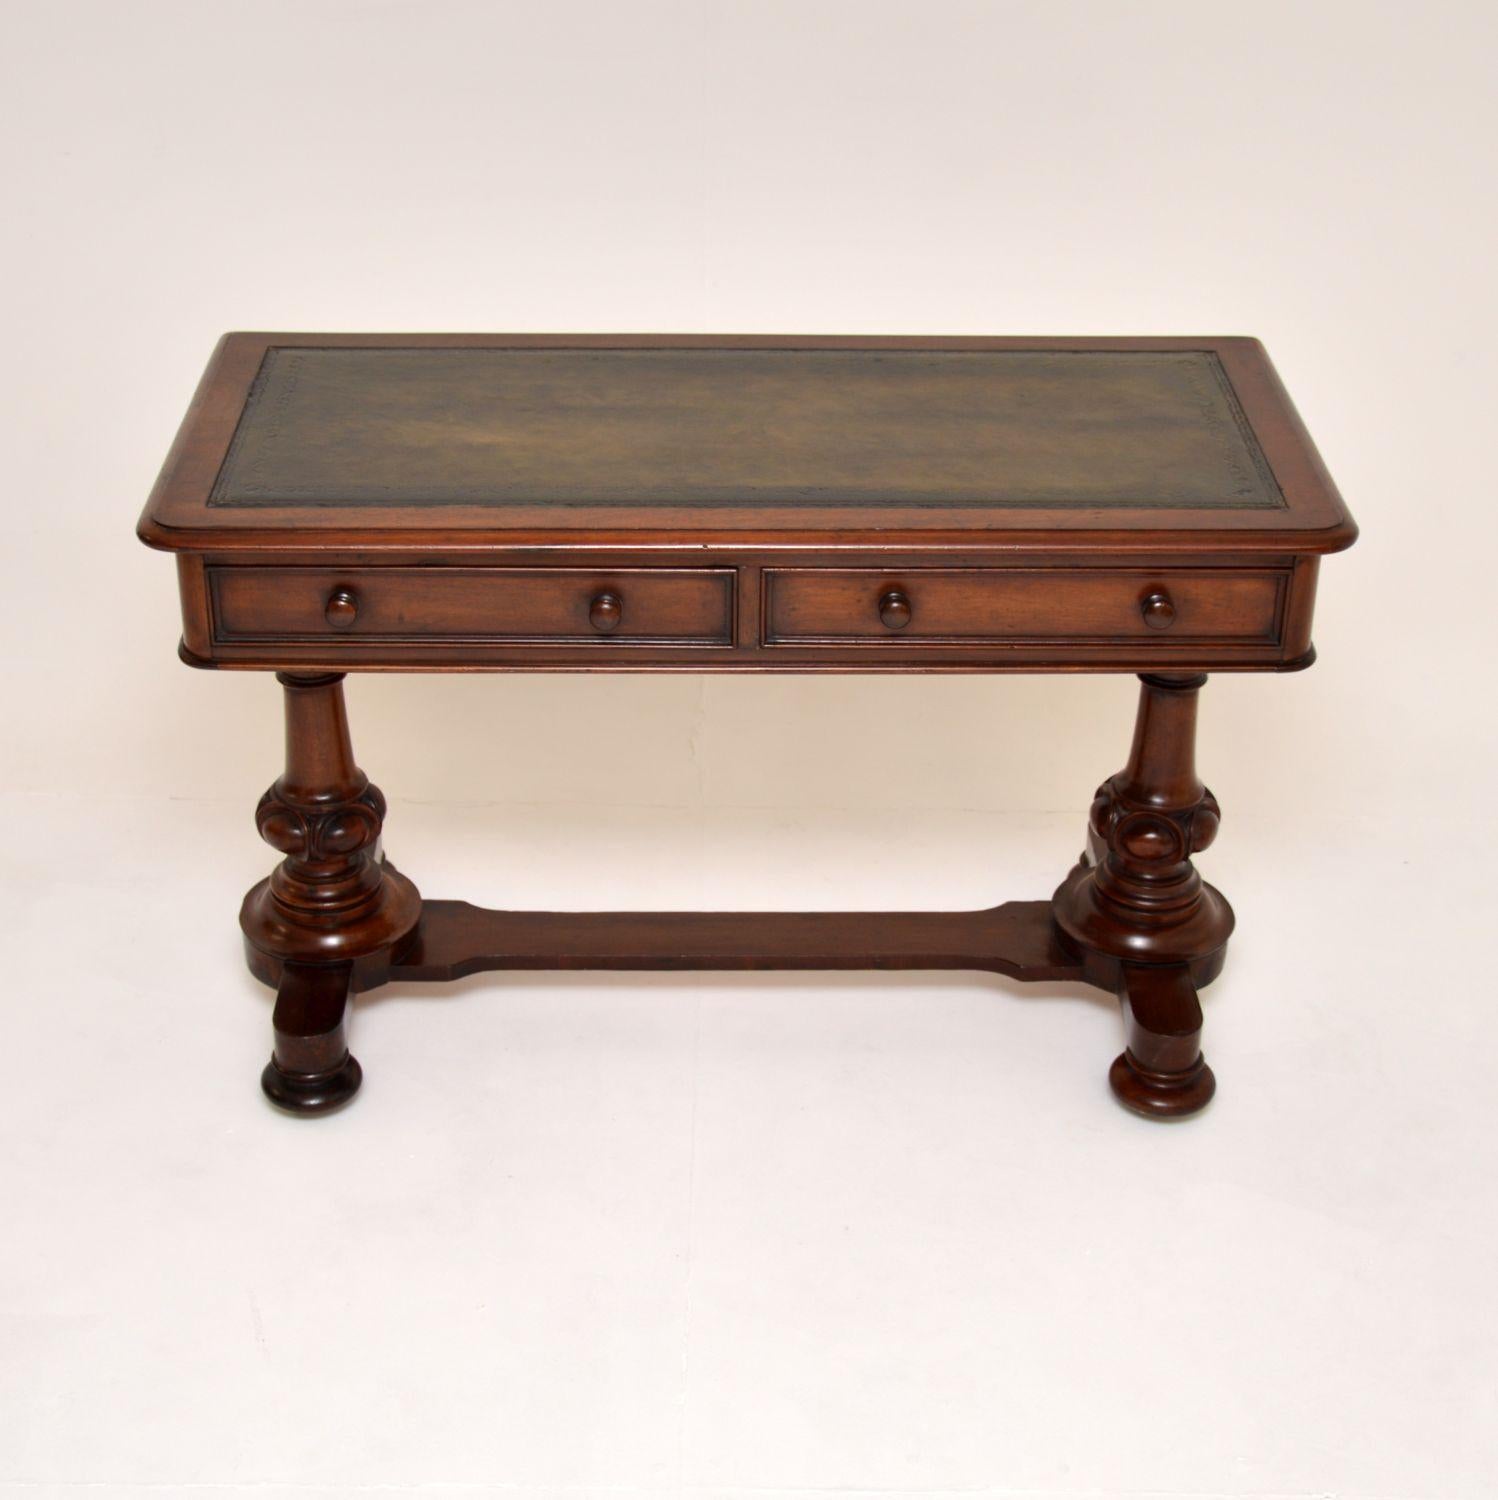 A superb antique William IV period writing desk. This was made in England, it dates from around 1830-1850.

The quality is outstanding, this is very well made and is a very useful size. The wood has a lovely colour tone and patina, this sits on